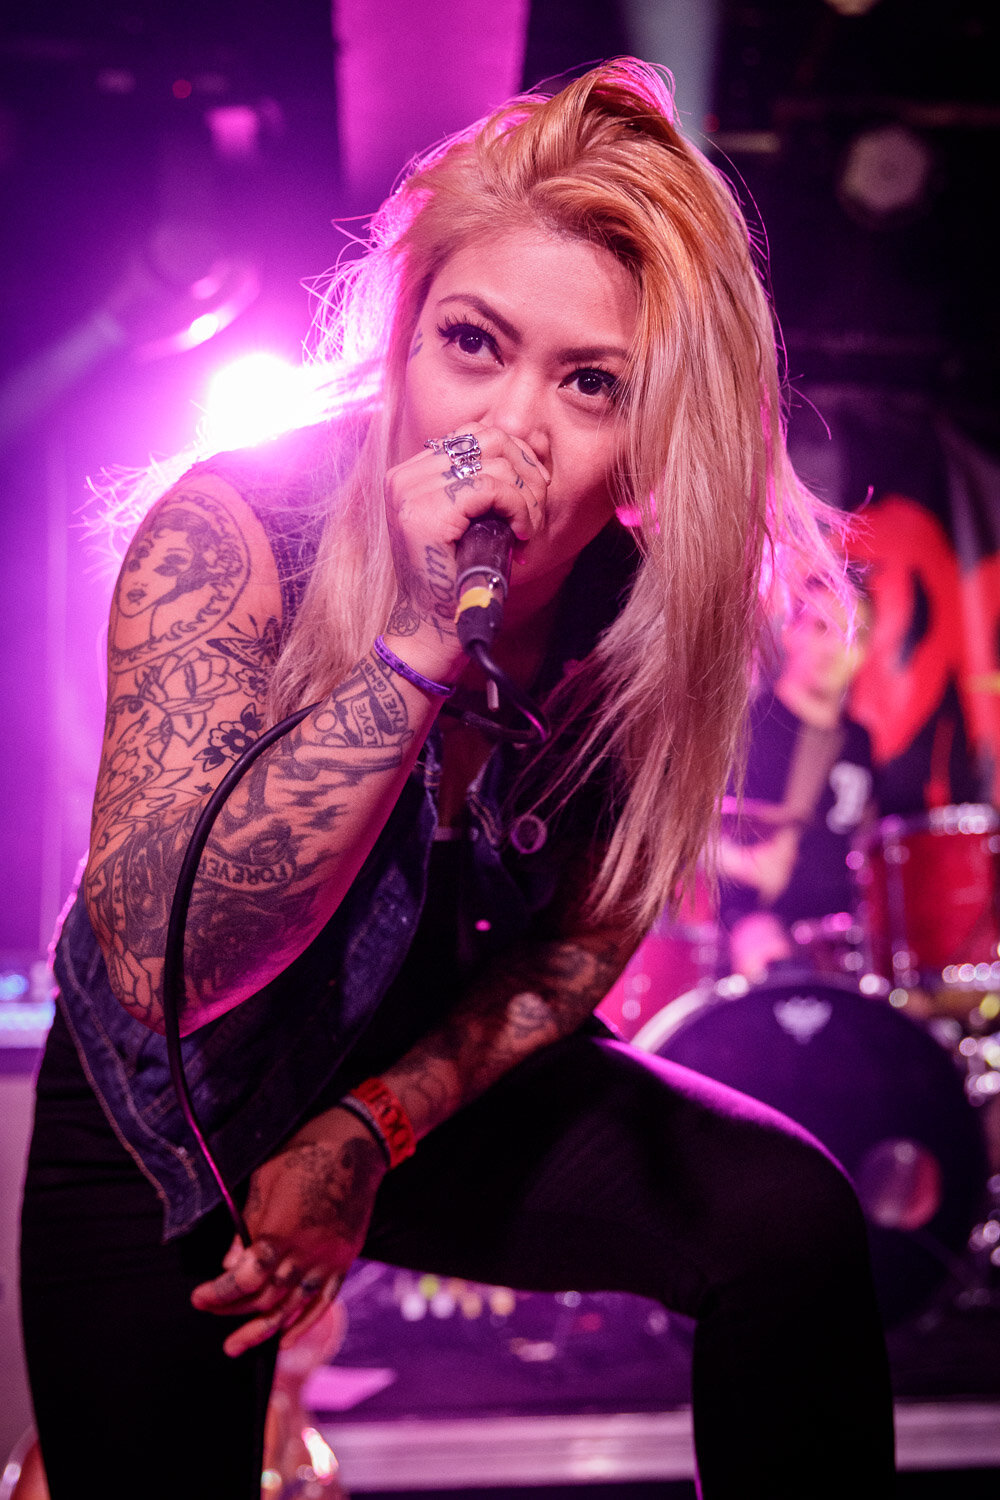 The Creepshow at Academy Club in Manchester on February 5th 2020